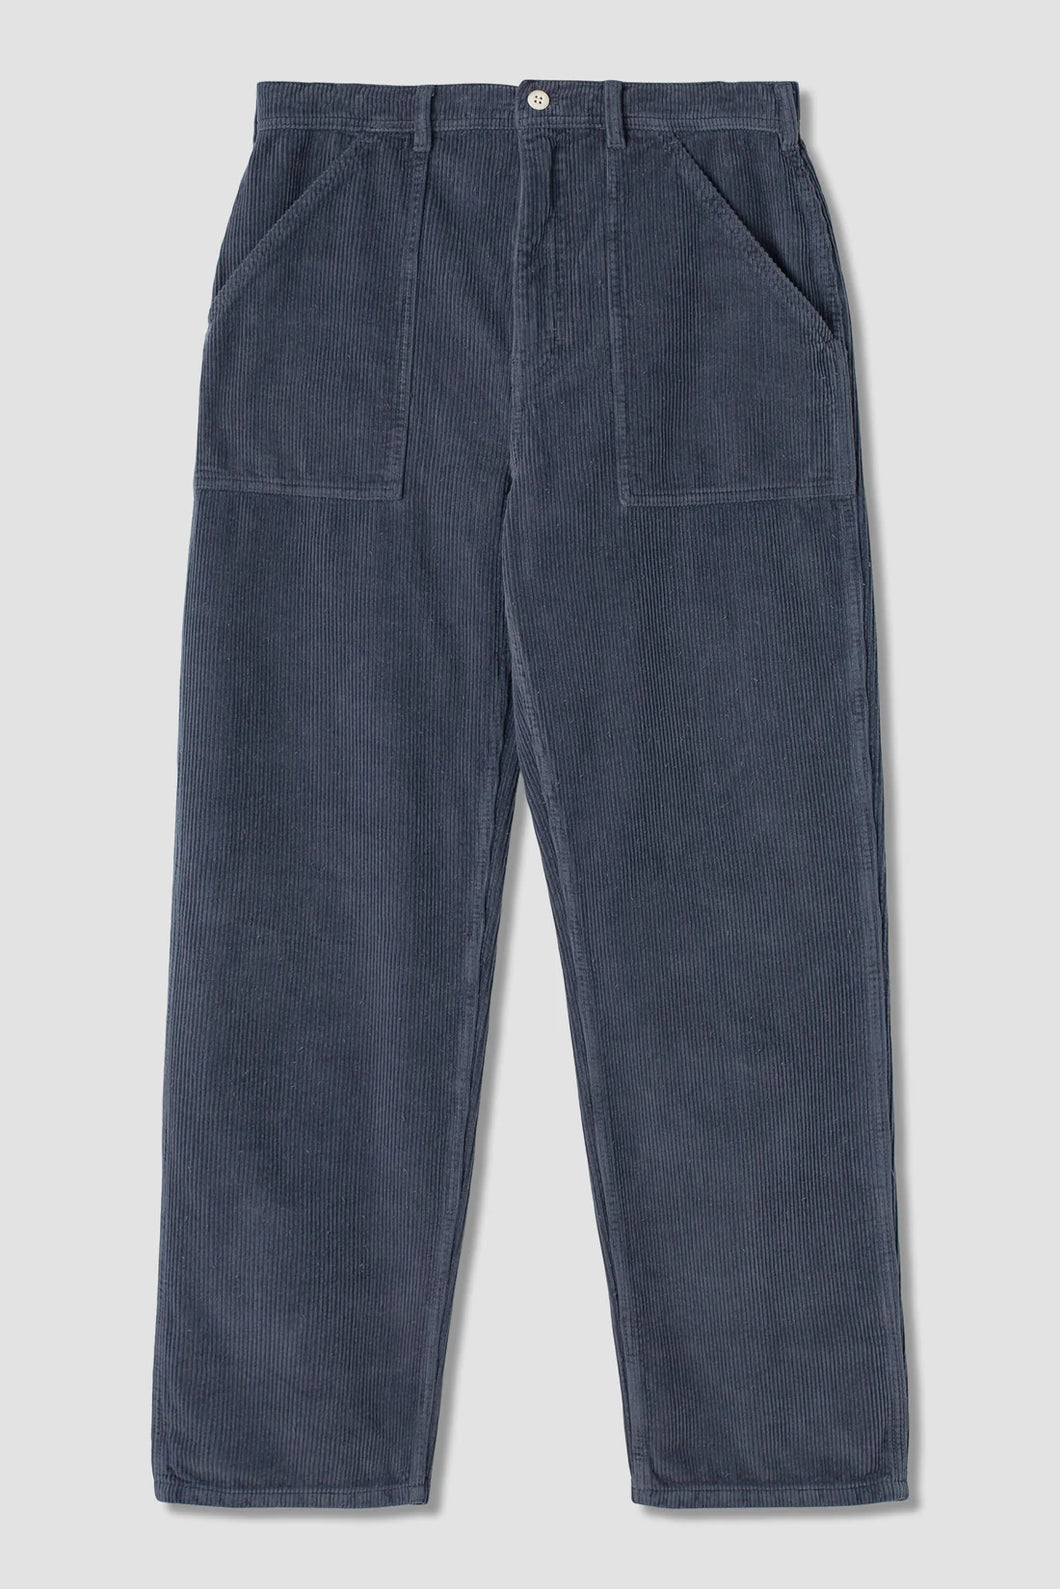 FIT PANT NAVY CORD